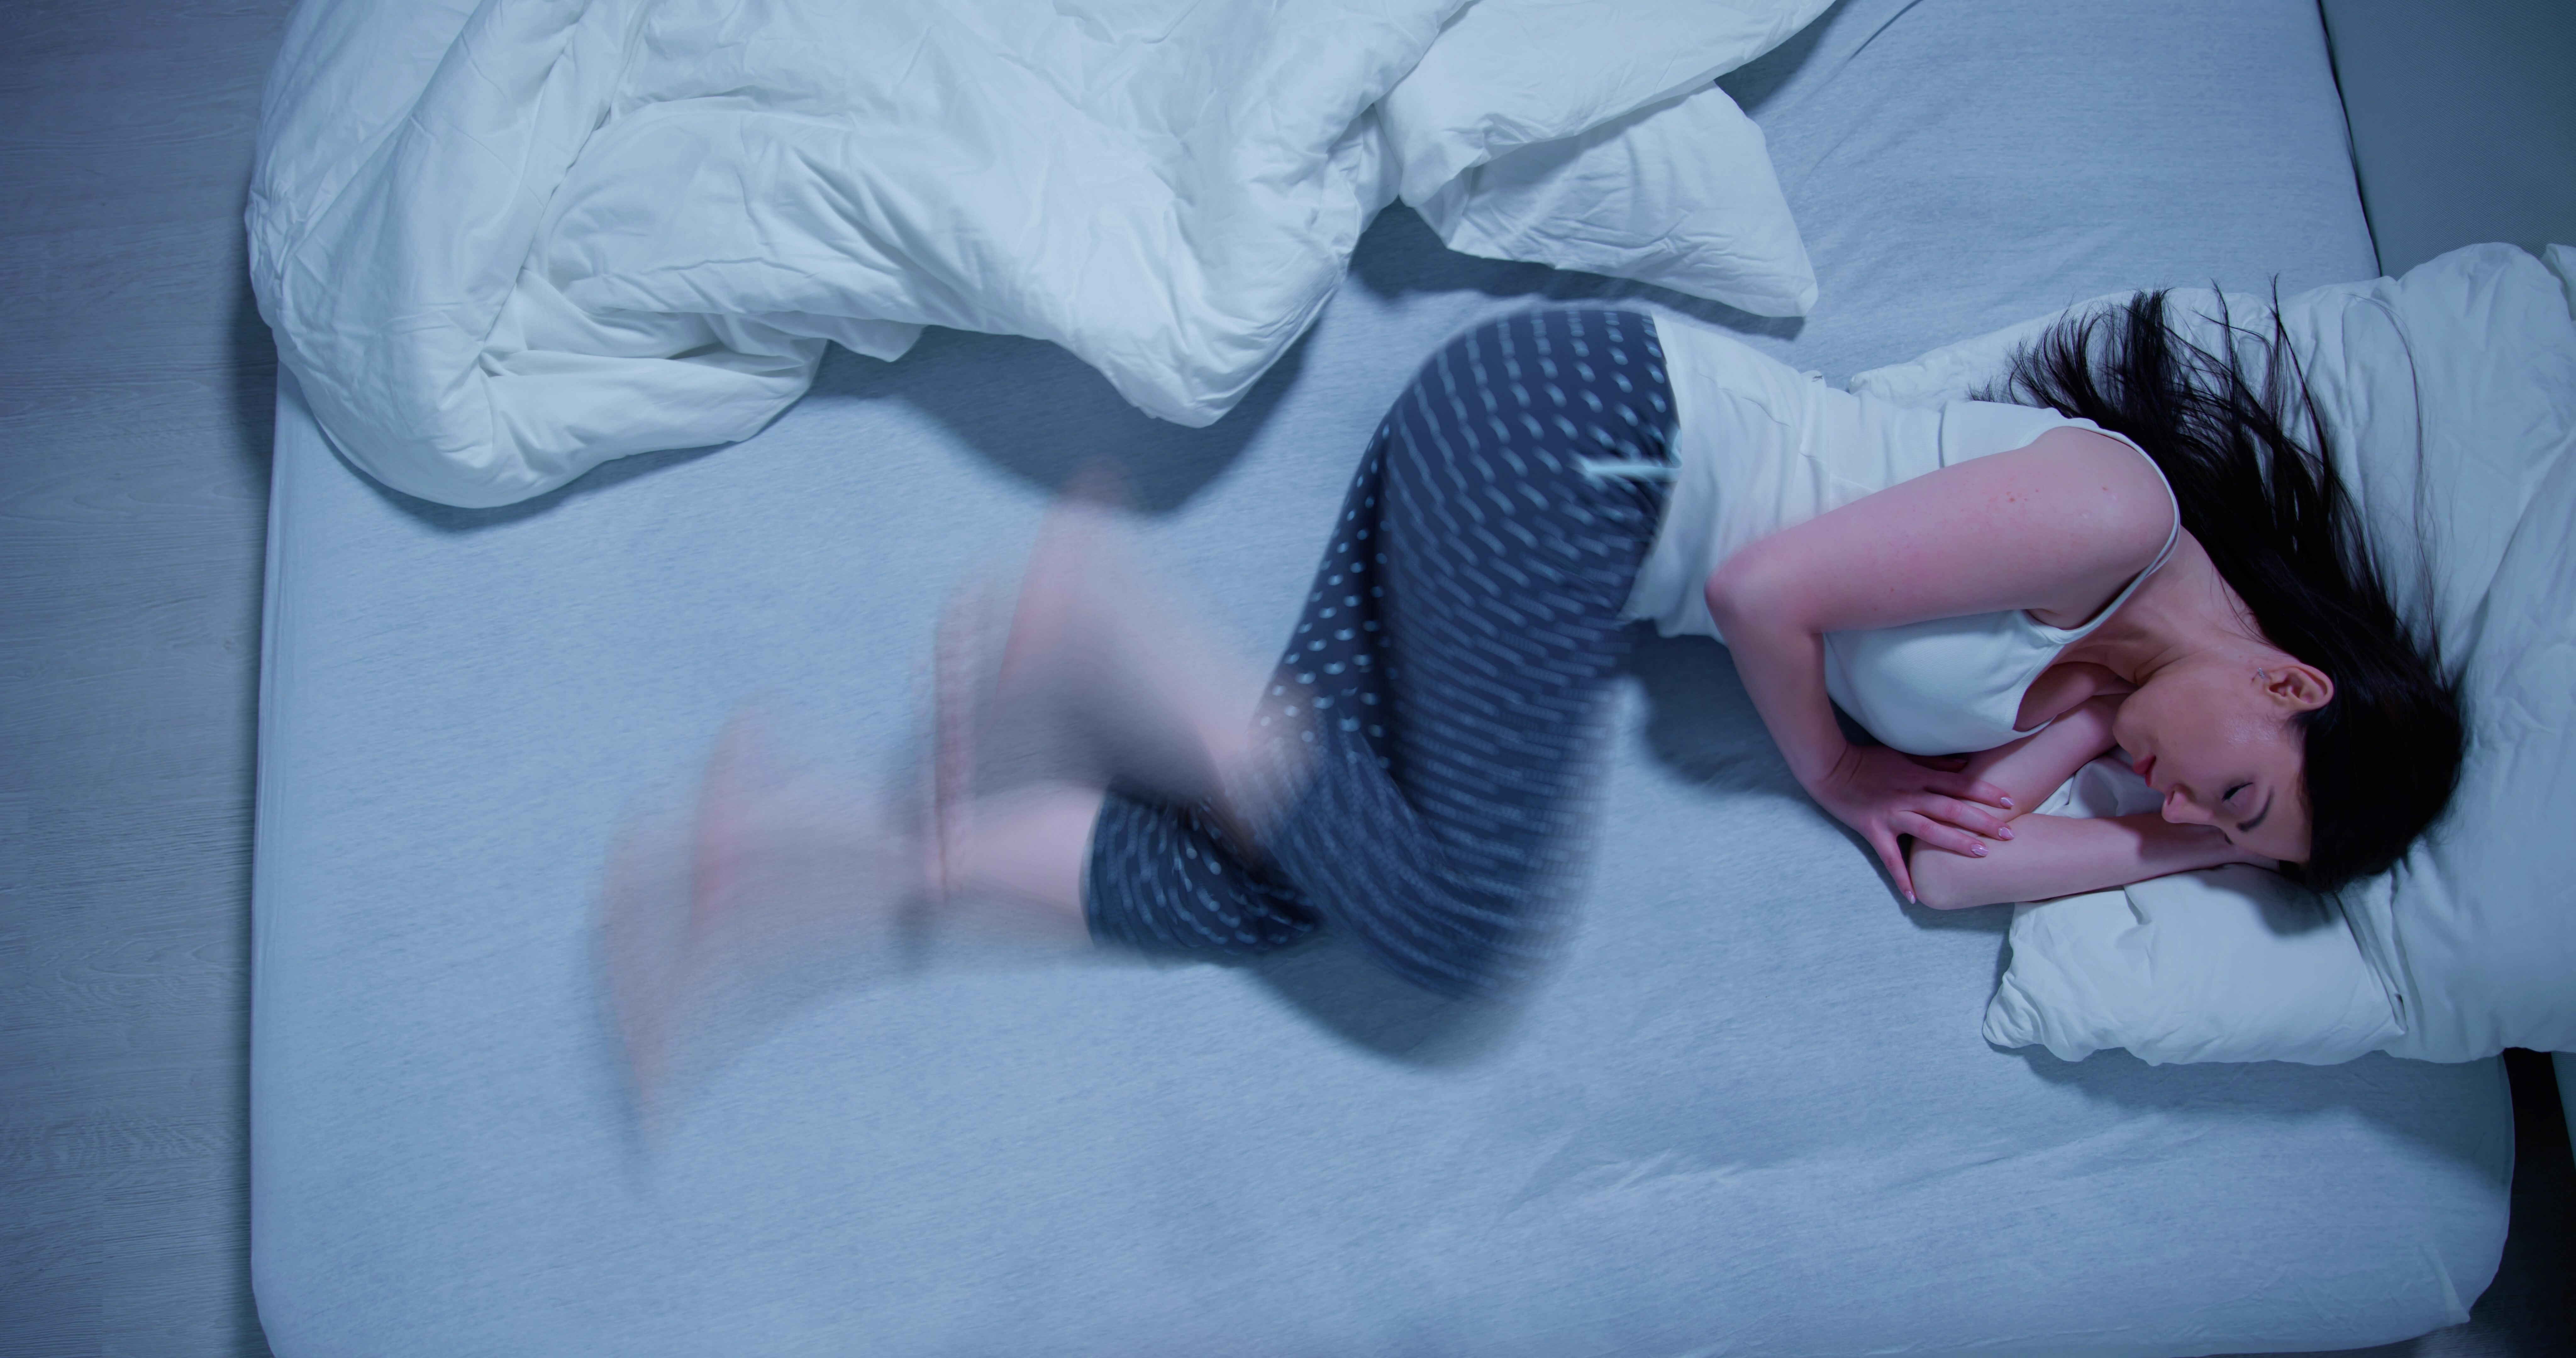 Restless leg syndrome causing a woman to kick and stir in her bed.